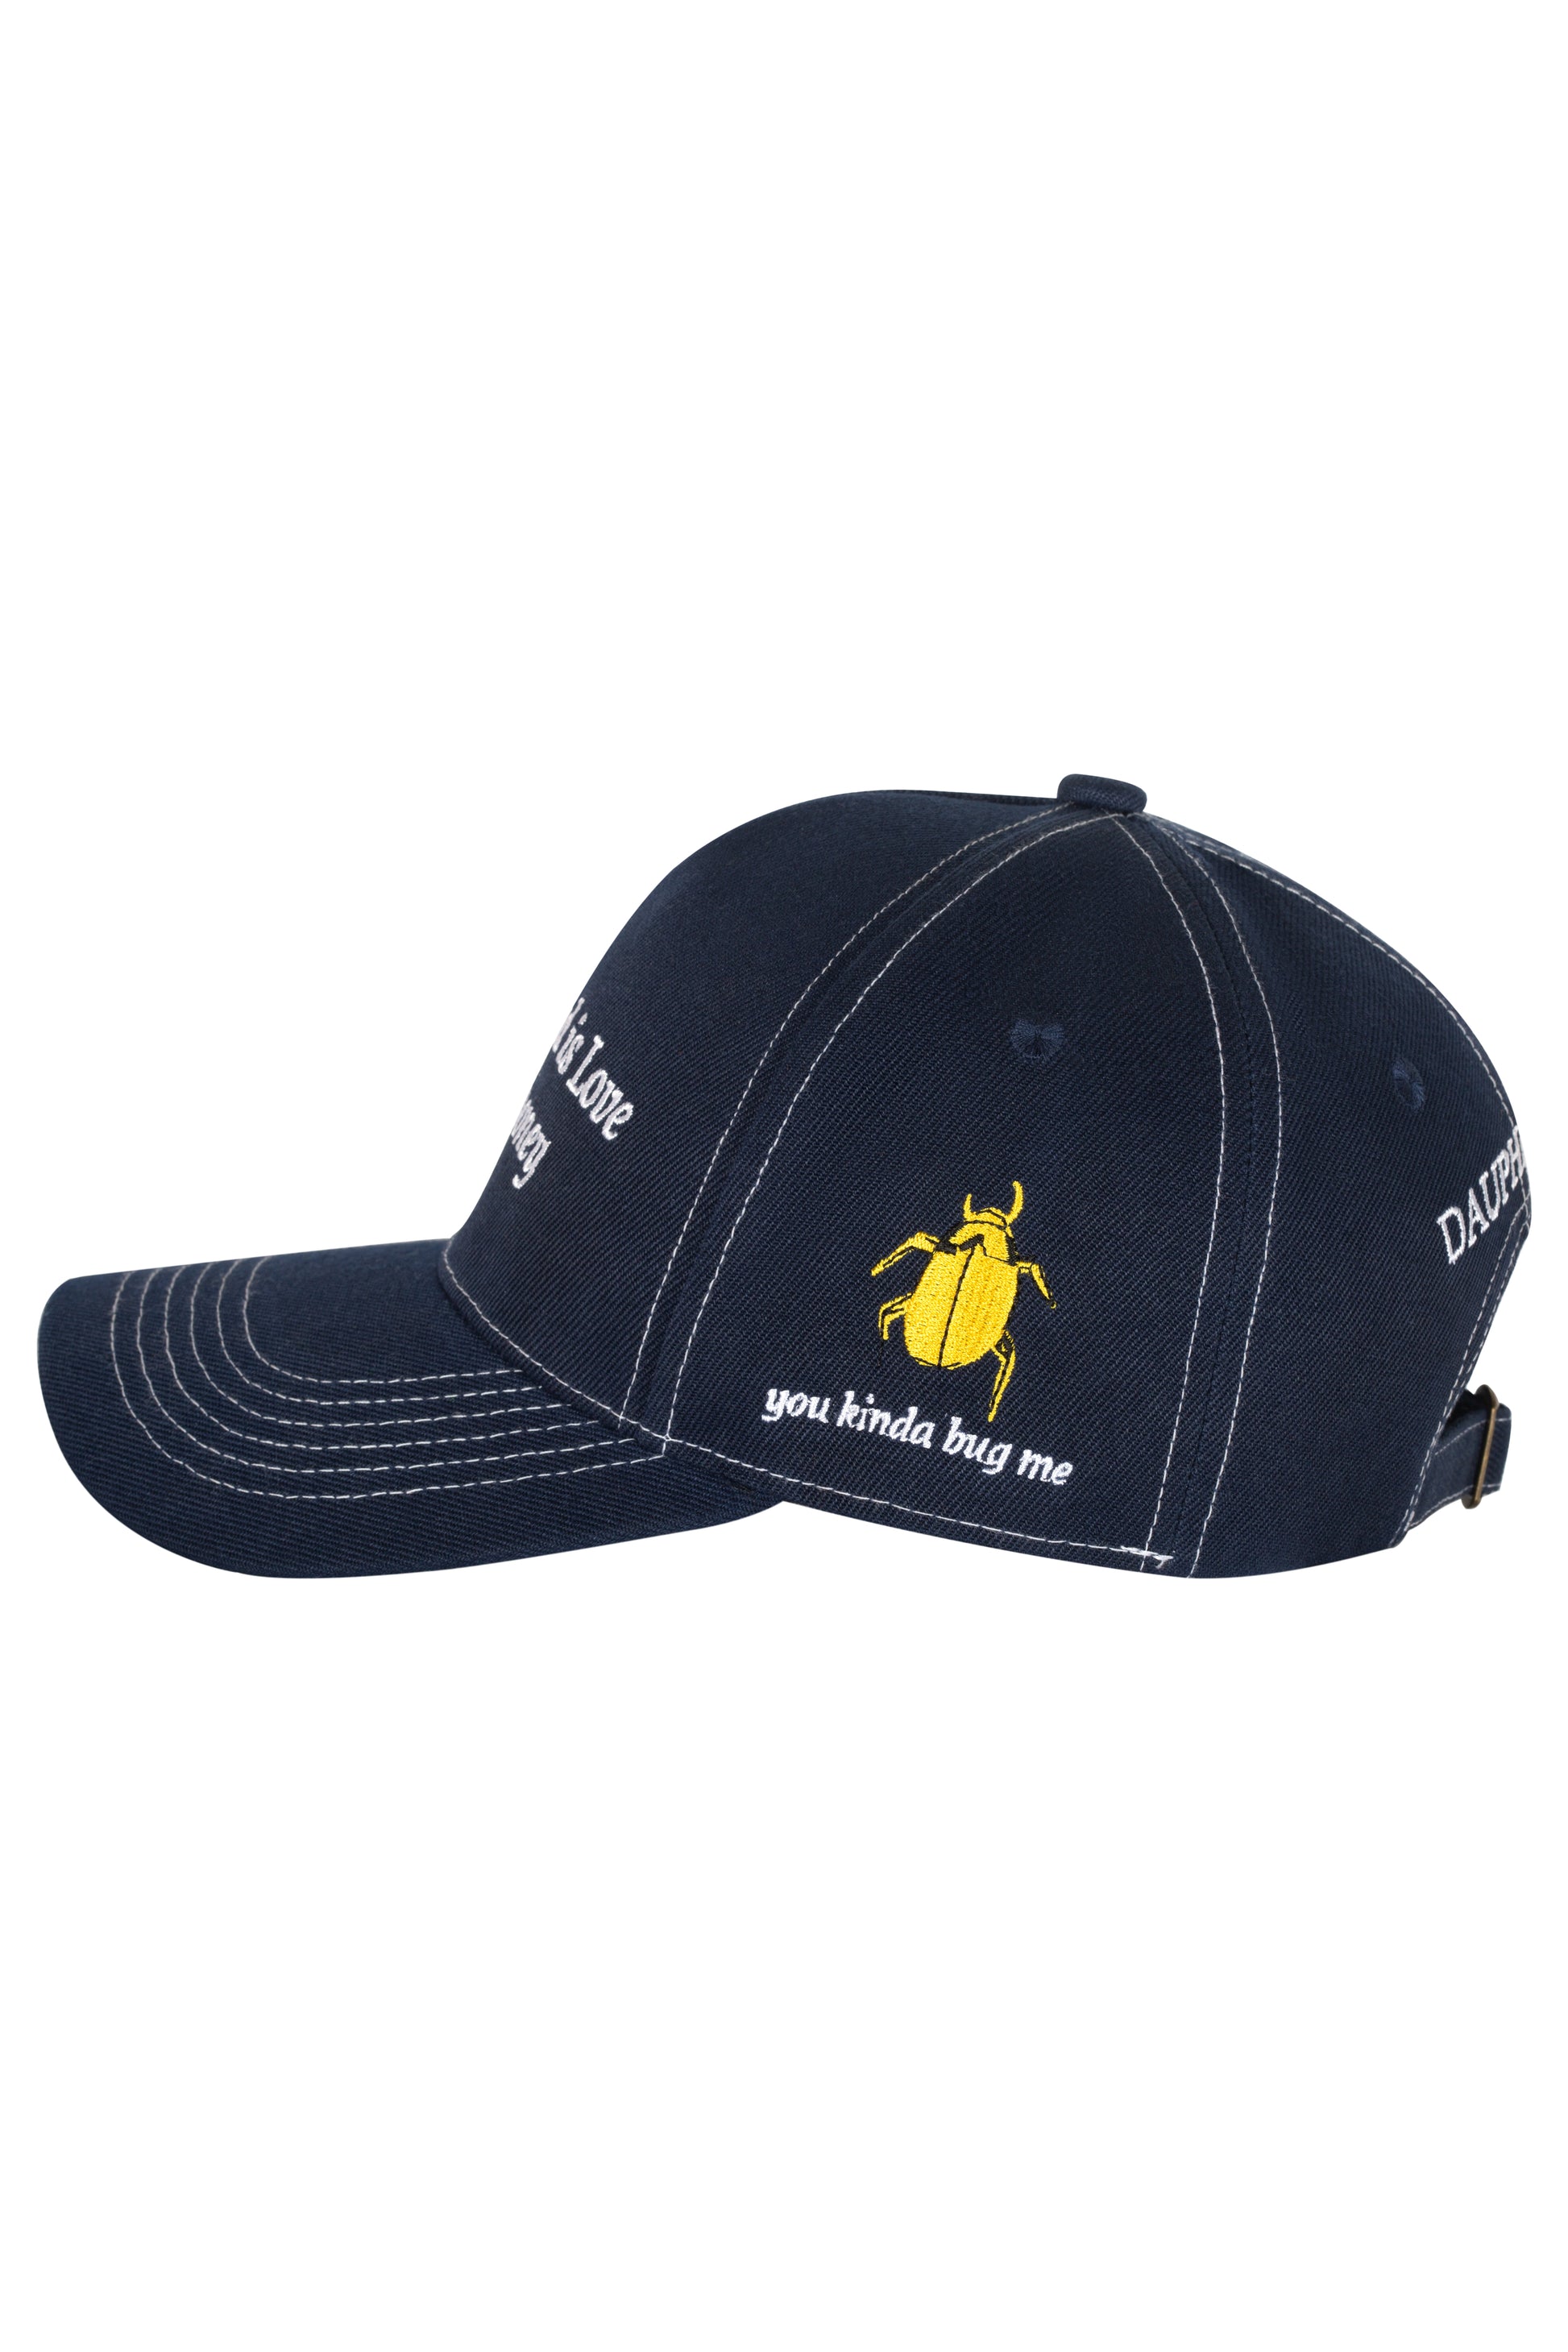 Side profile of navy blue cap with yellow embroidered beetle and the words "You kinda bug me" embroidered in white thread.